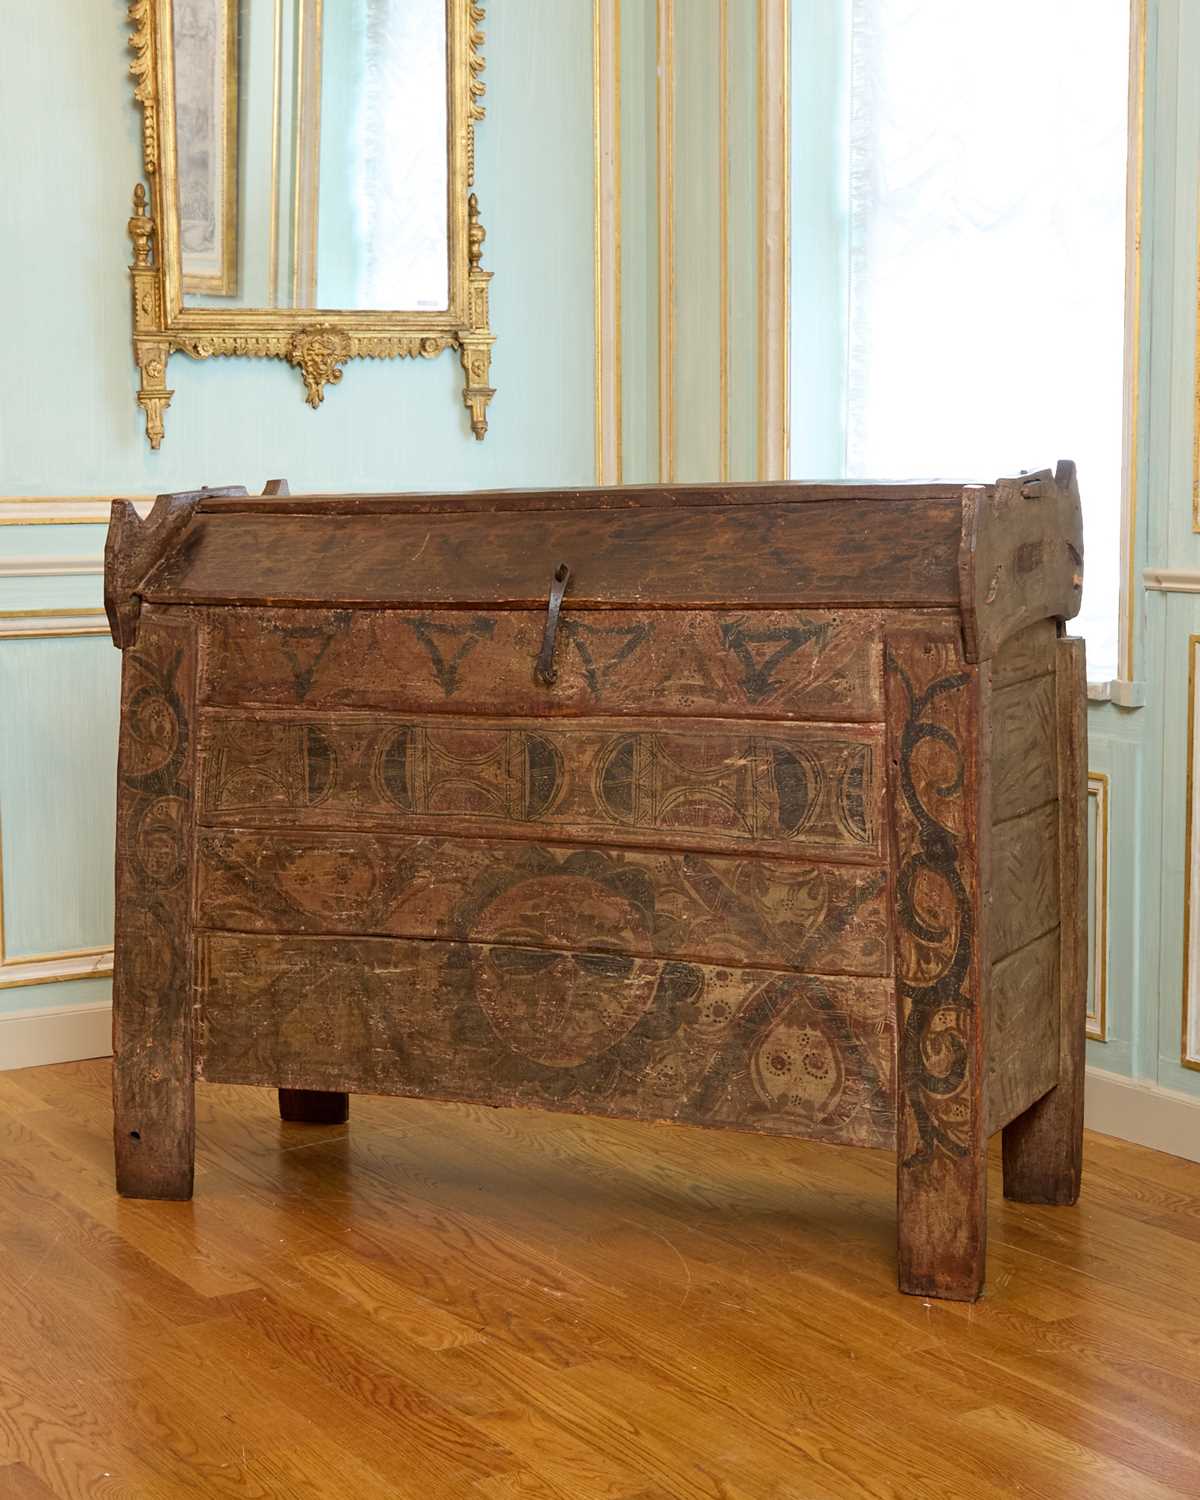 Lot 381 - Early Painted Chest (Truhe / Stollen)